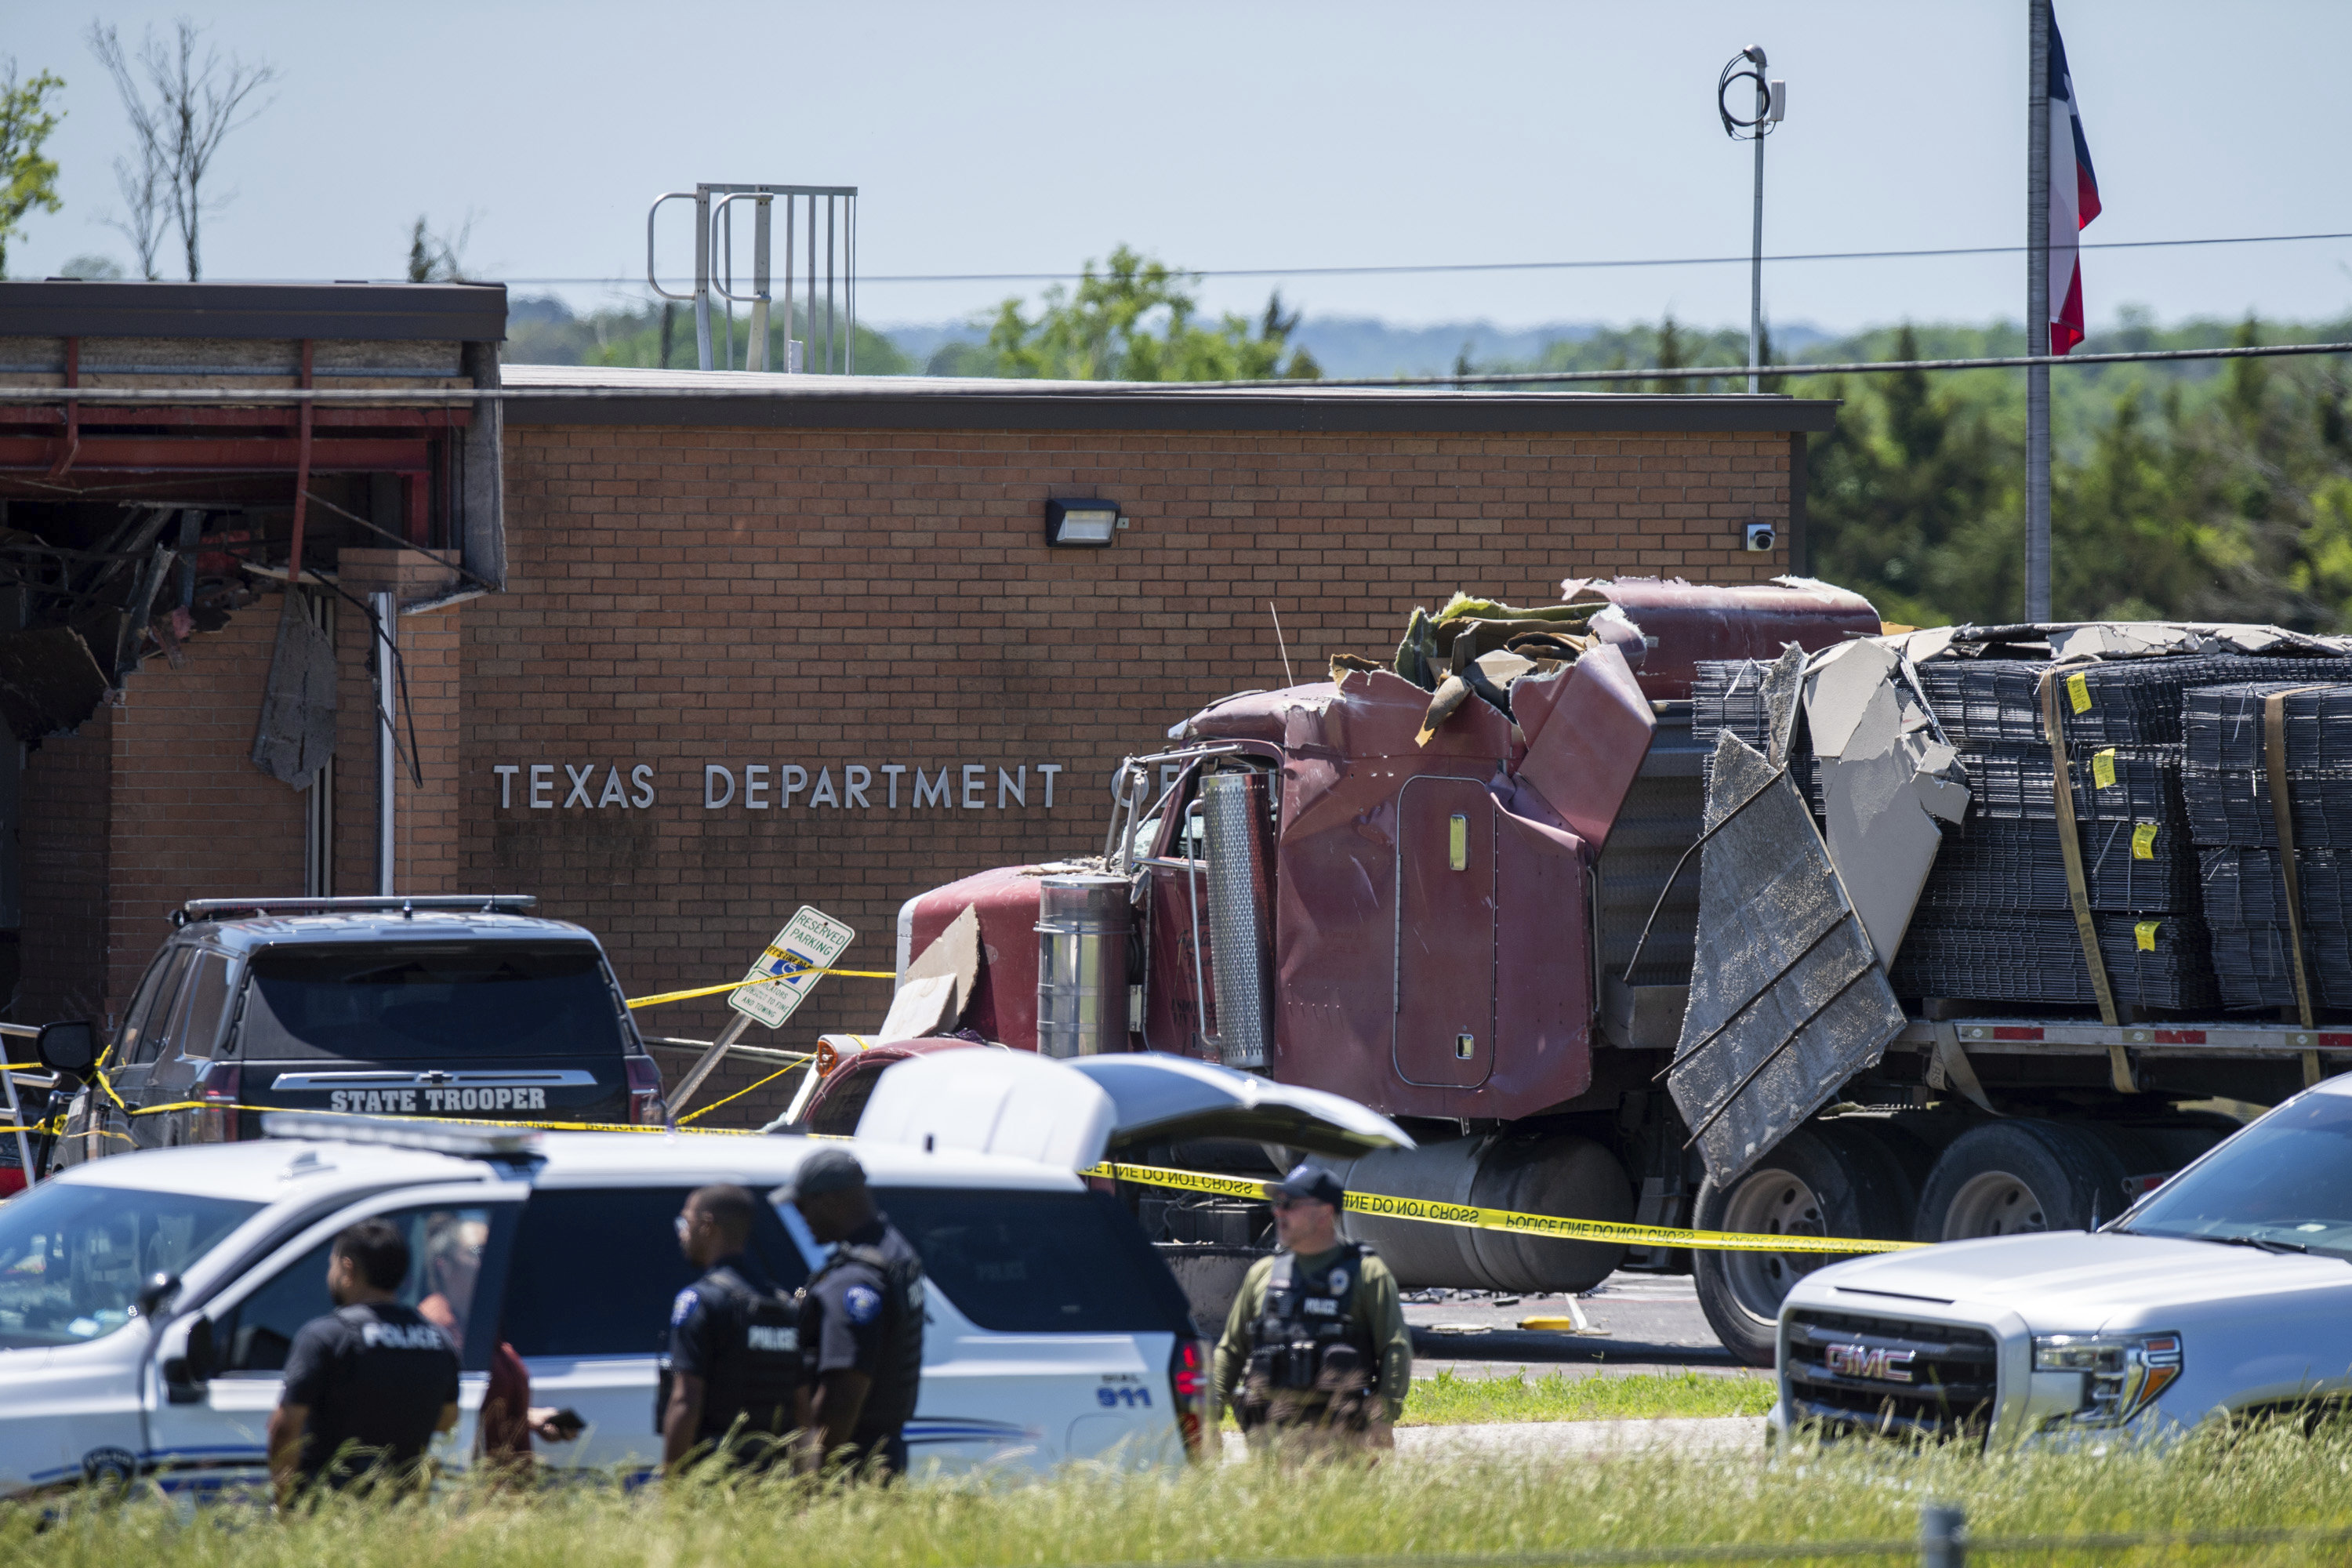 1 killed, 13 hurt after driver rams truck into tex. state agency, officials say